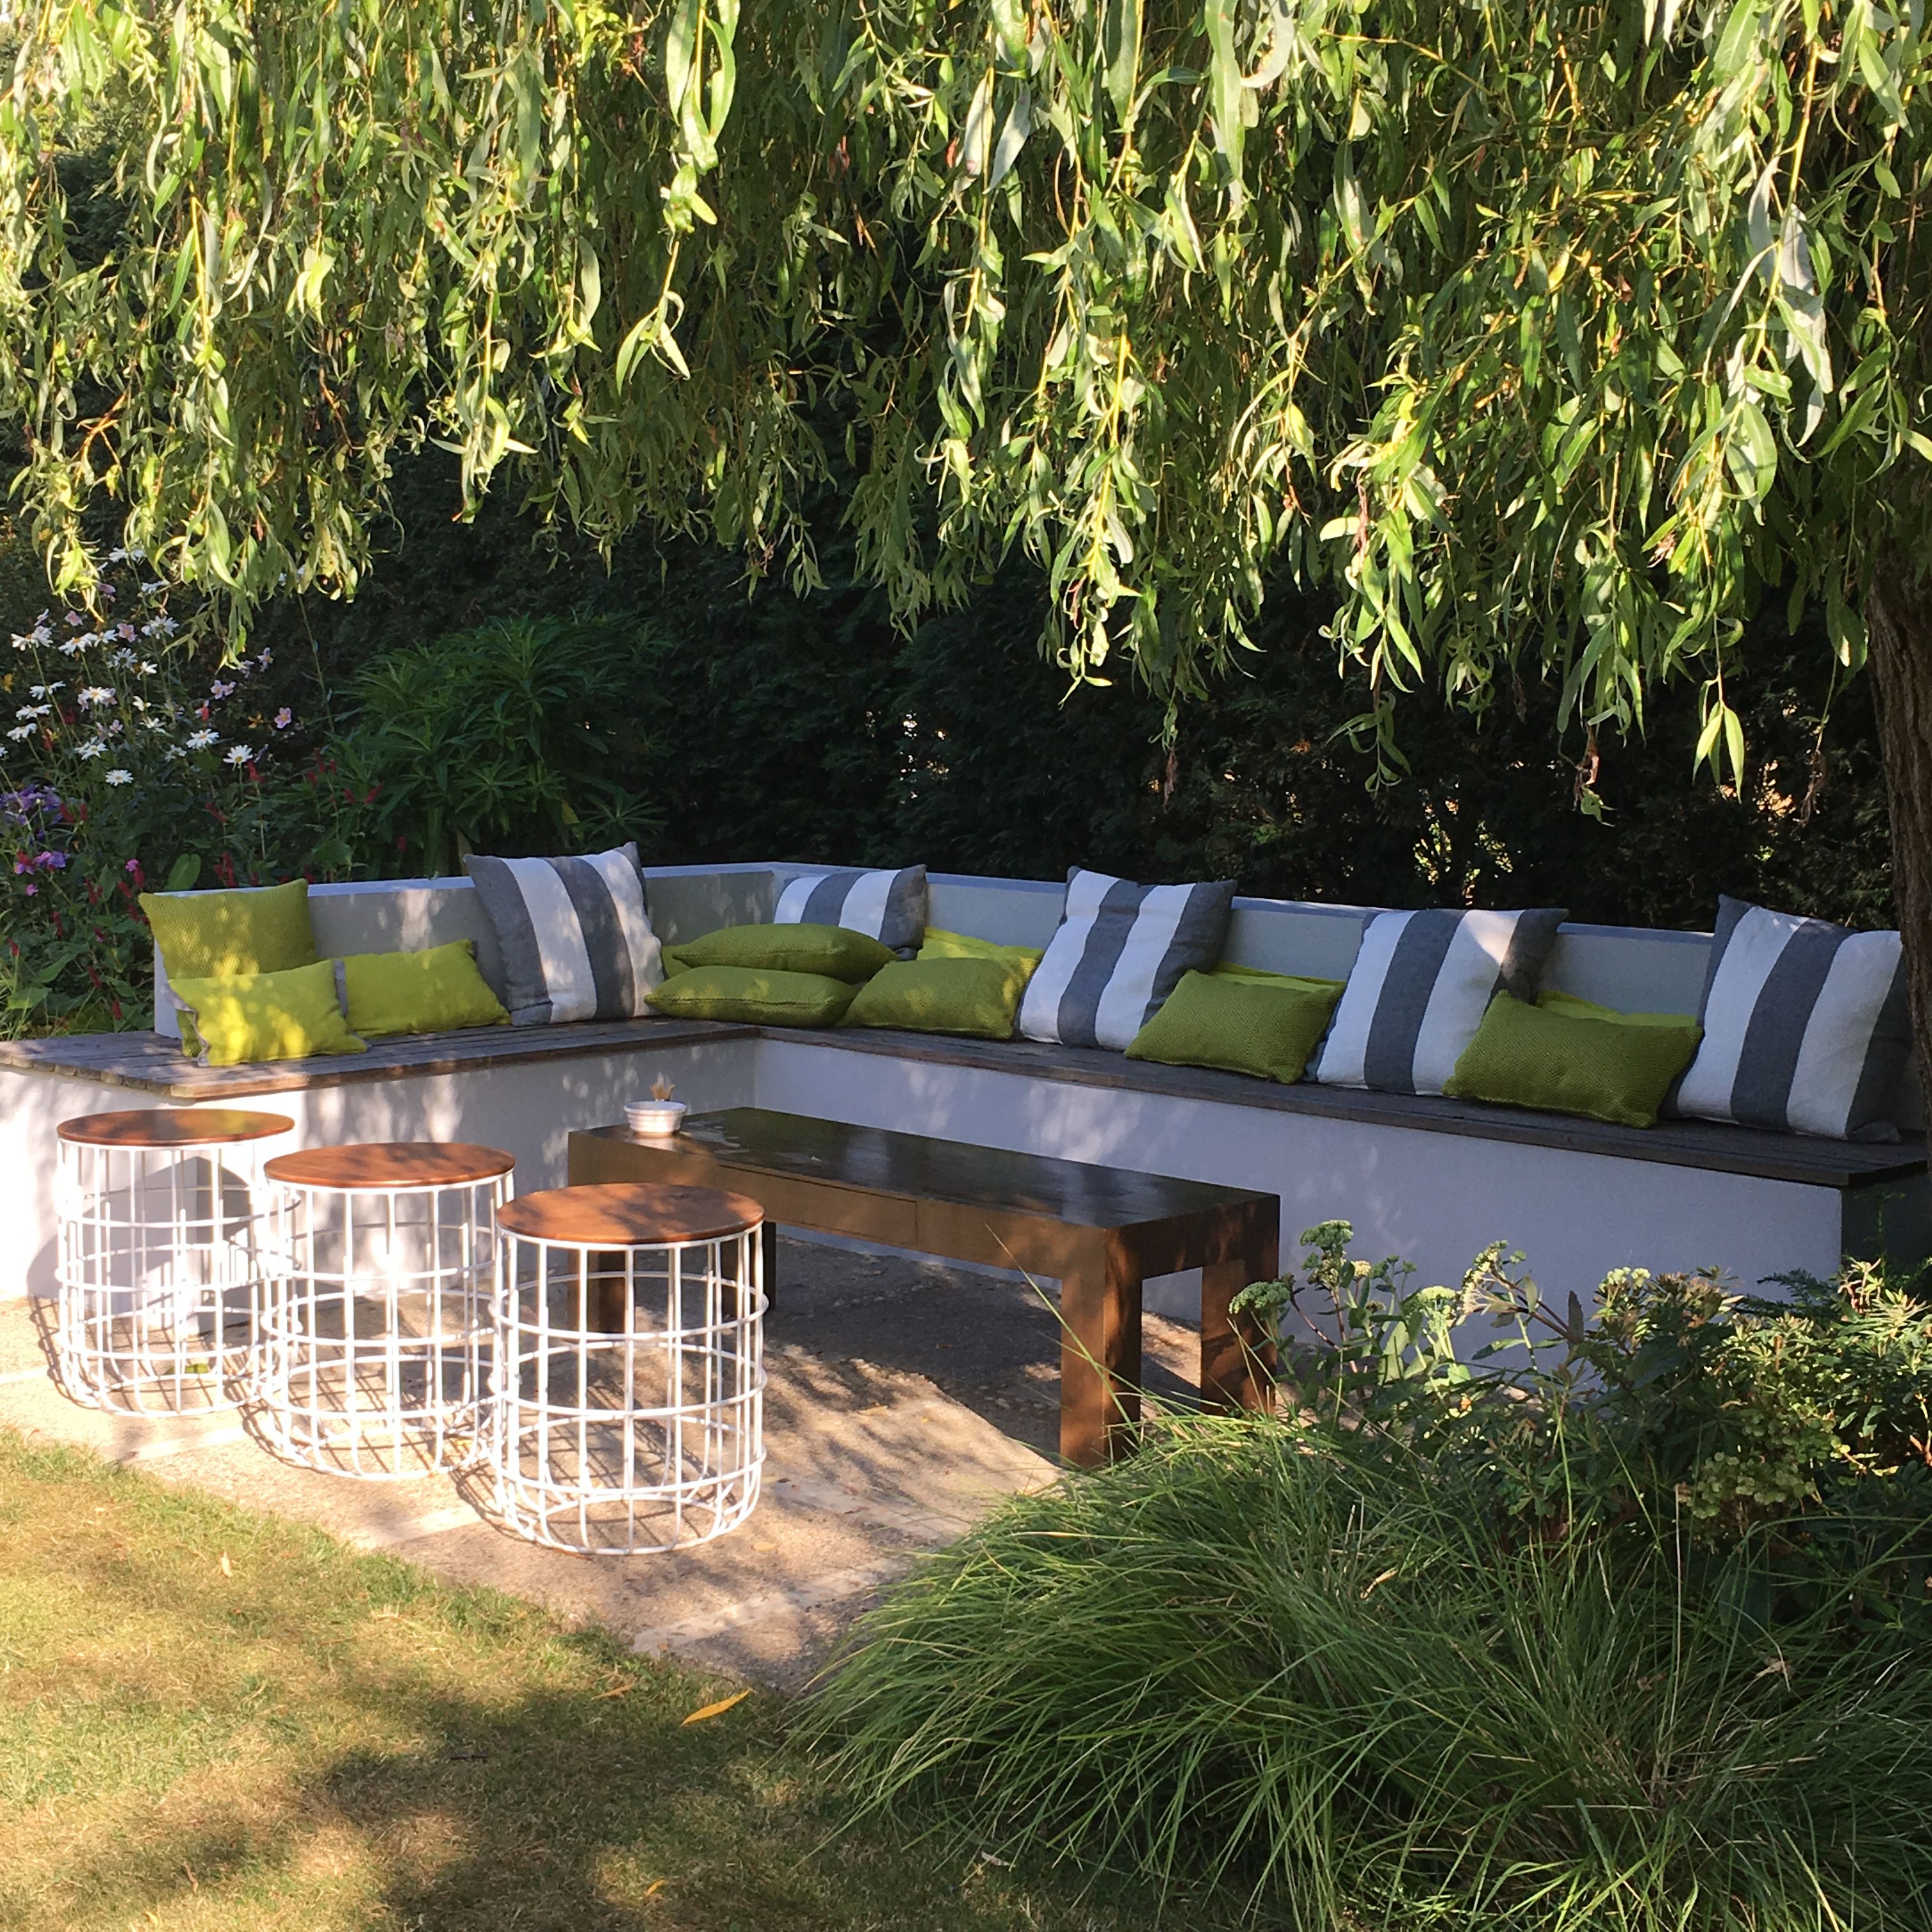 L-shaped built-in garden seating area